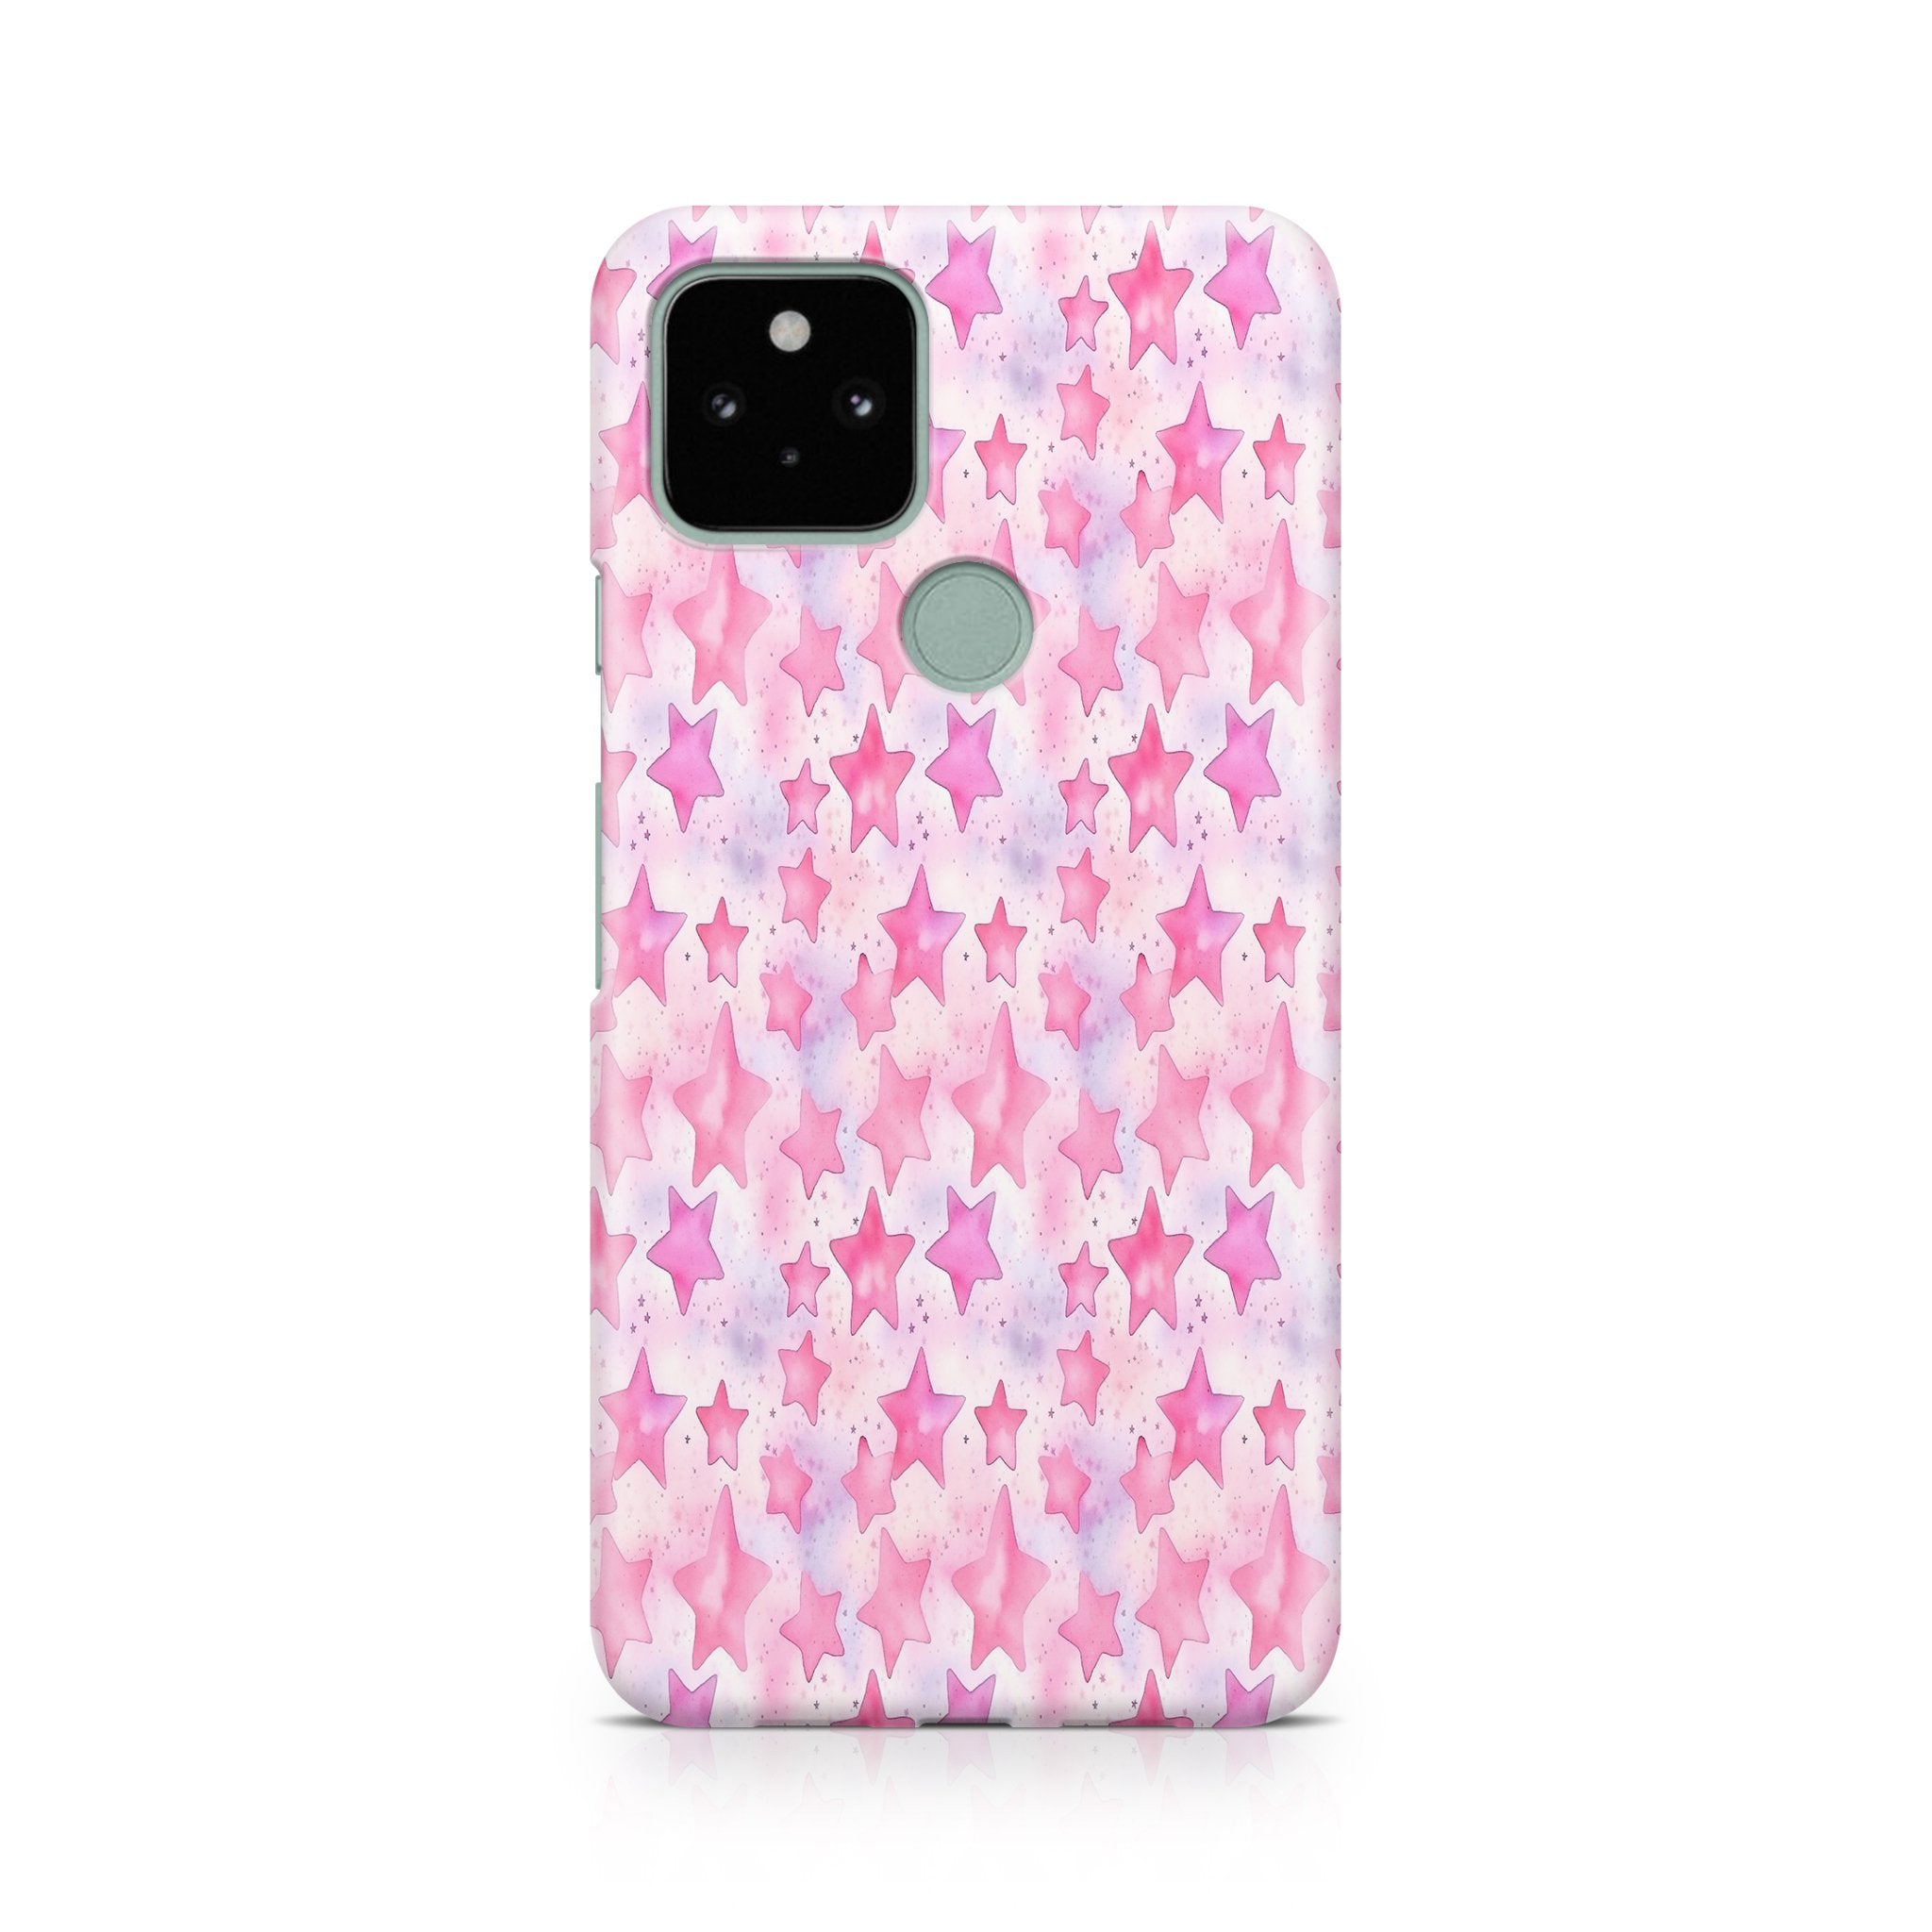 Pink Star - Google phone case designs by CaseSwagger